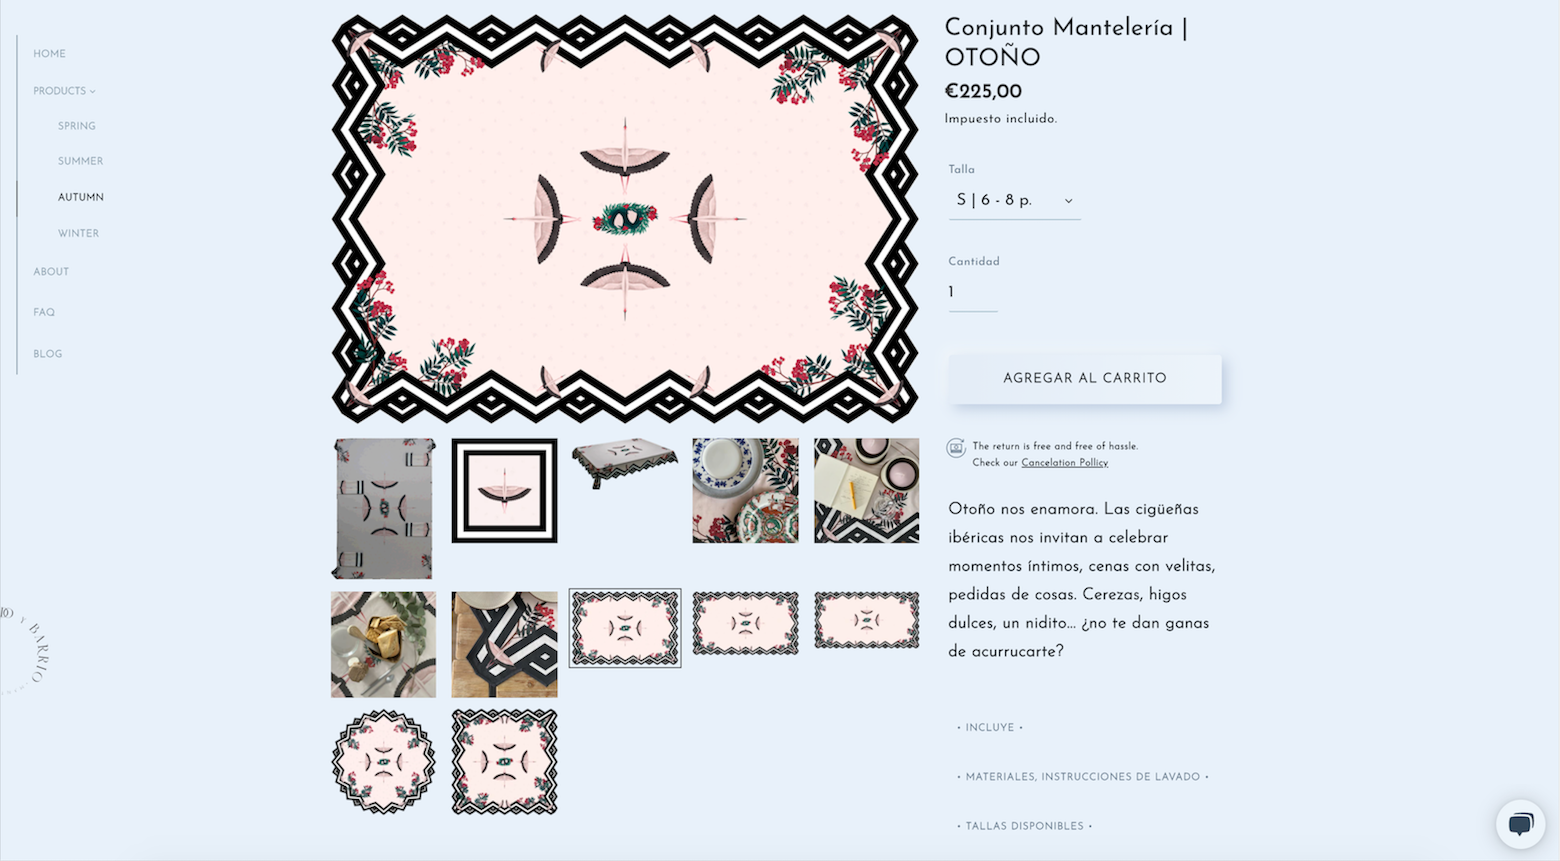  Product purchase page featuring 12 image options showing various sizes of tablecloth, close-ups of border and central detail, and inspirational place settings. To the right of the image is purchase and product information. The tablecloth shown is "Autumn," which is pink and features the signature black chevron border and four Iberian cranes (birds) arranged in a cross in the center.